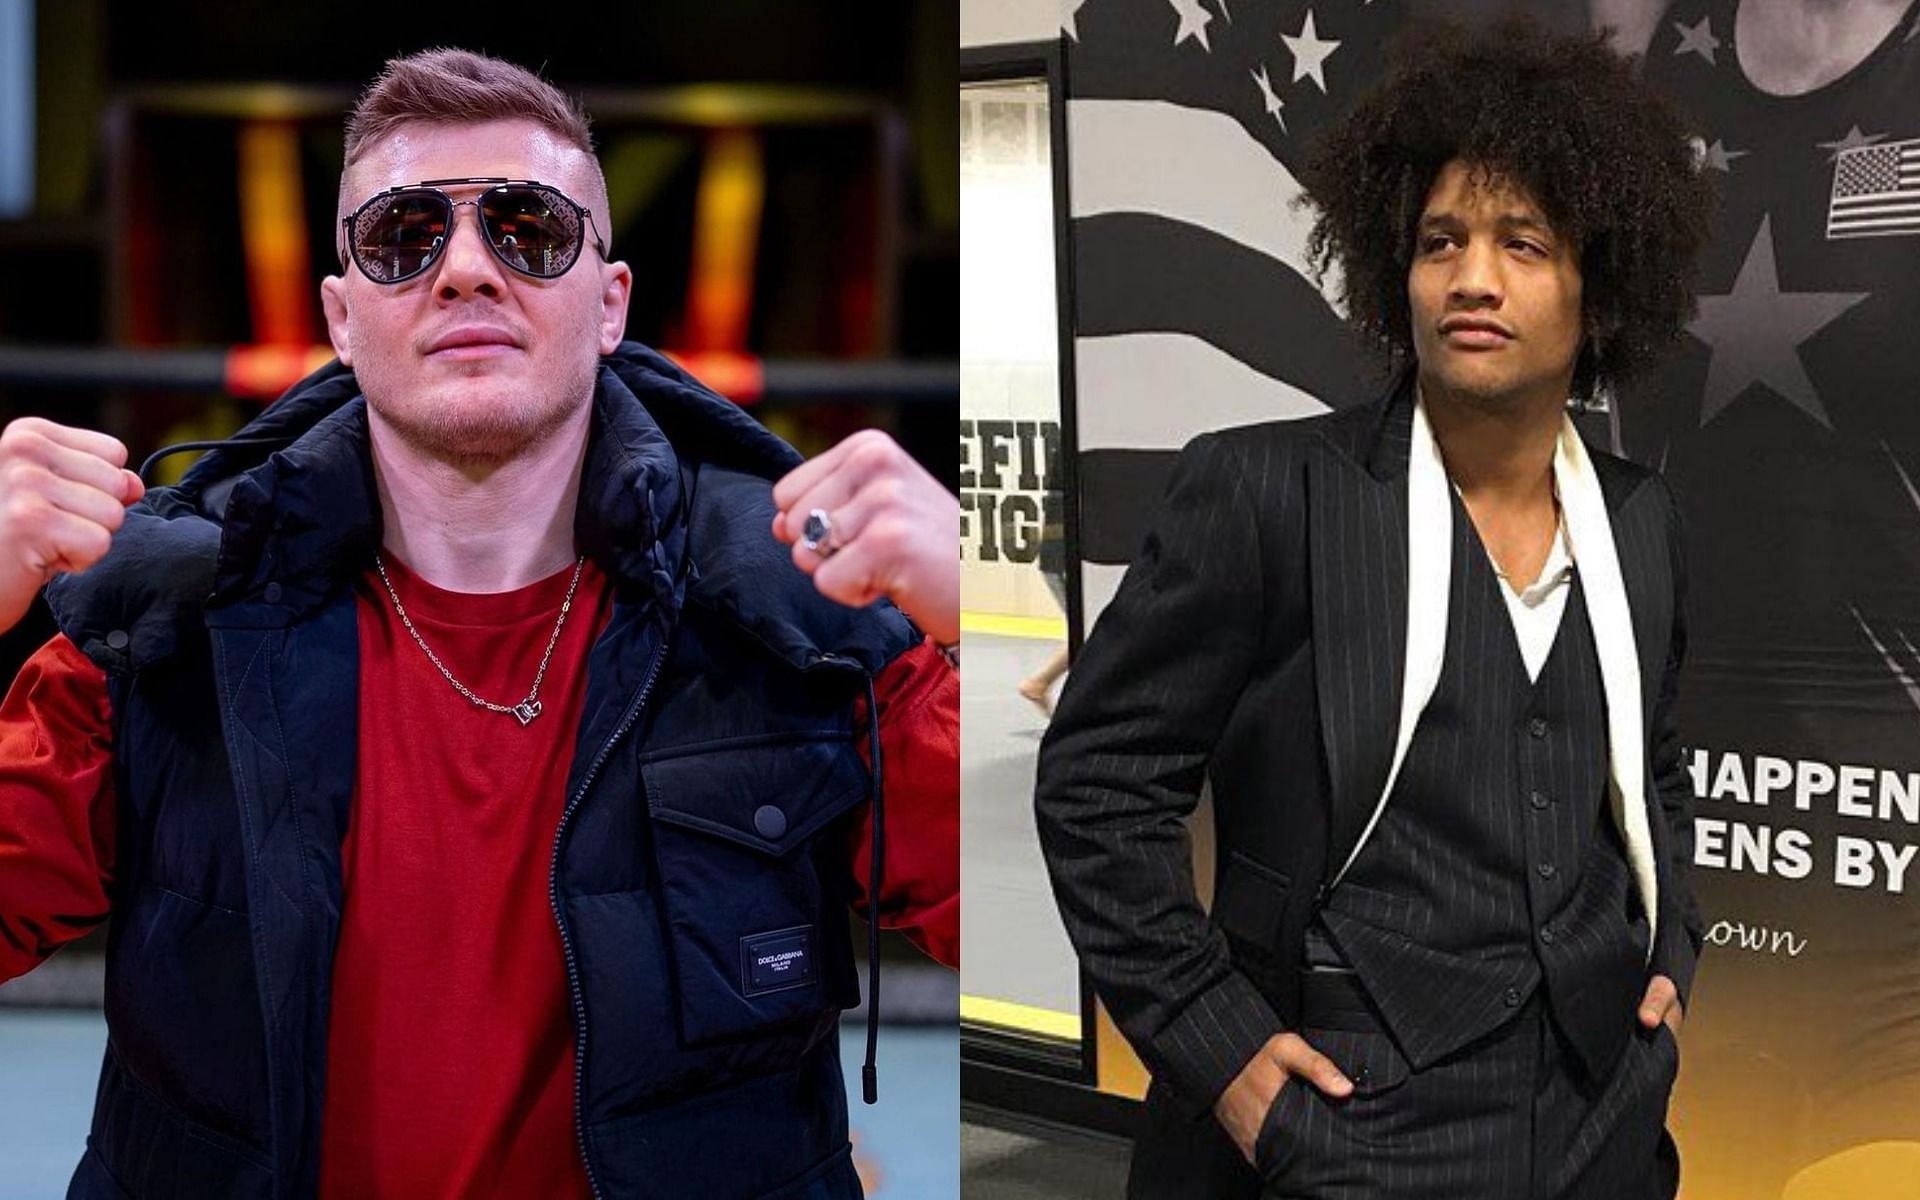 Marvin Vettori (left), Alex Caceres (right) [Images Courtesy: @marvinvettori @i_am_here_now_alex on Instagram]